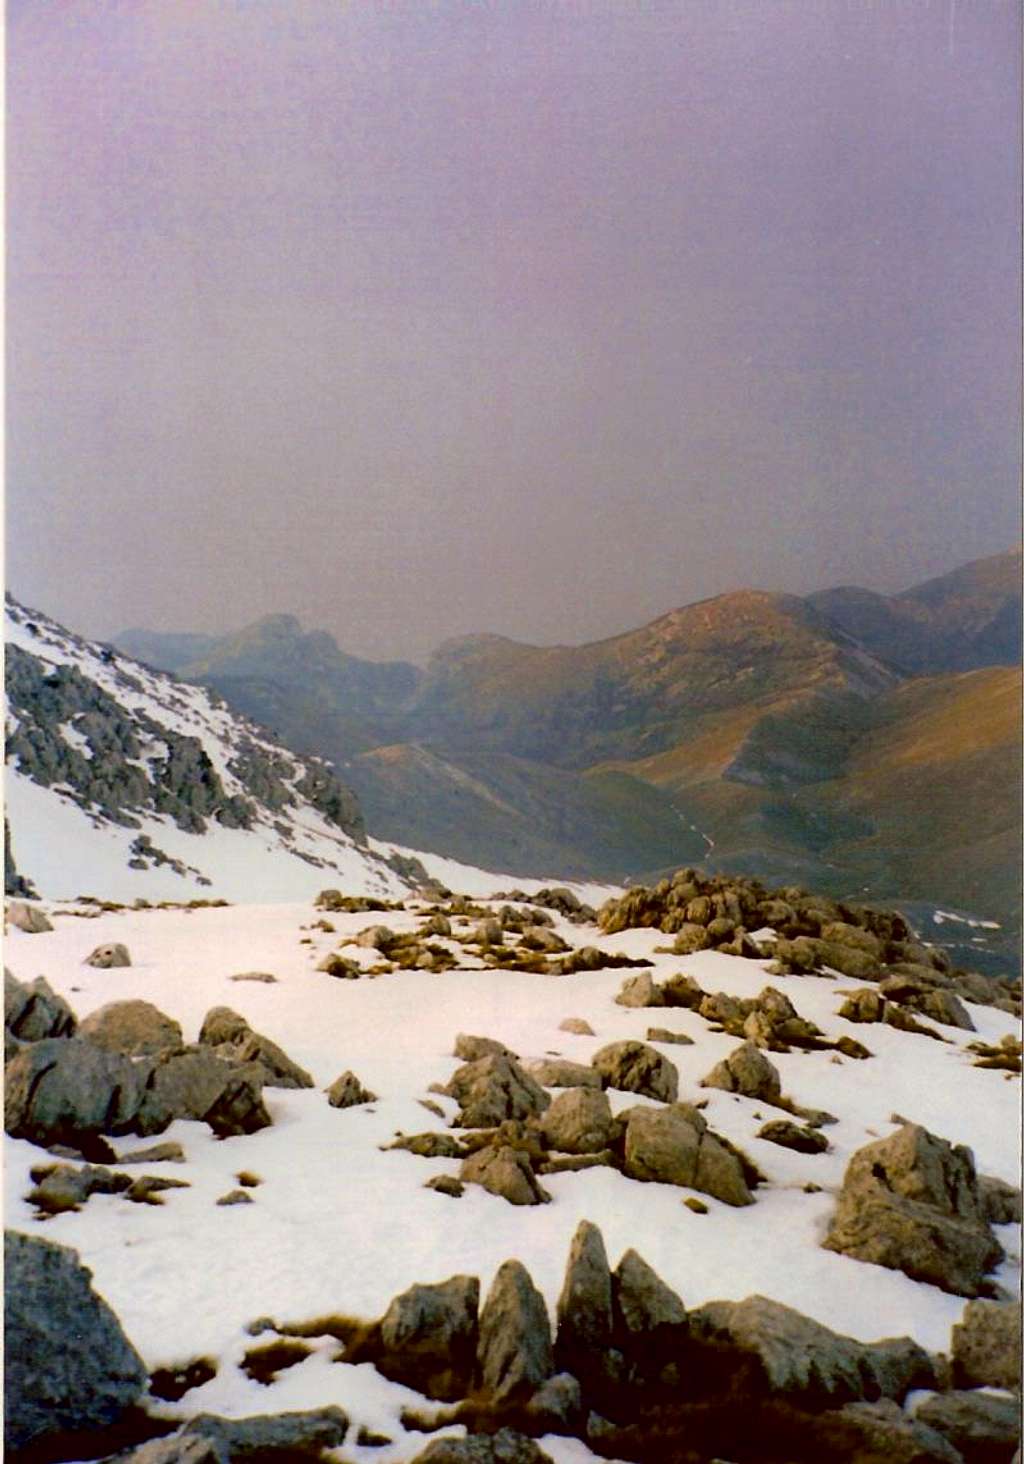 View from Dirfis summit to the Aegean sea-20 March 2004(a year with little snow)